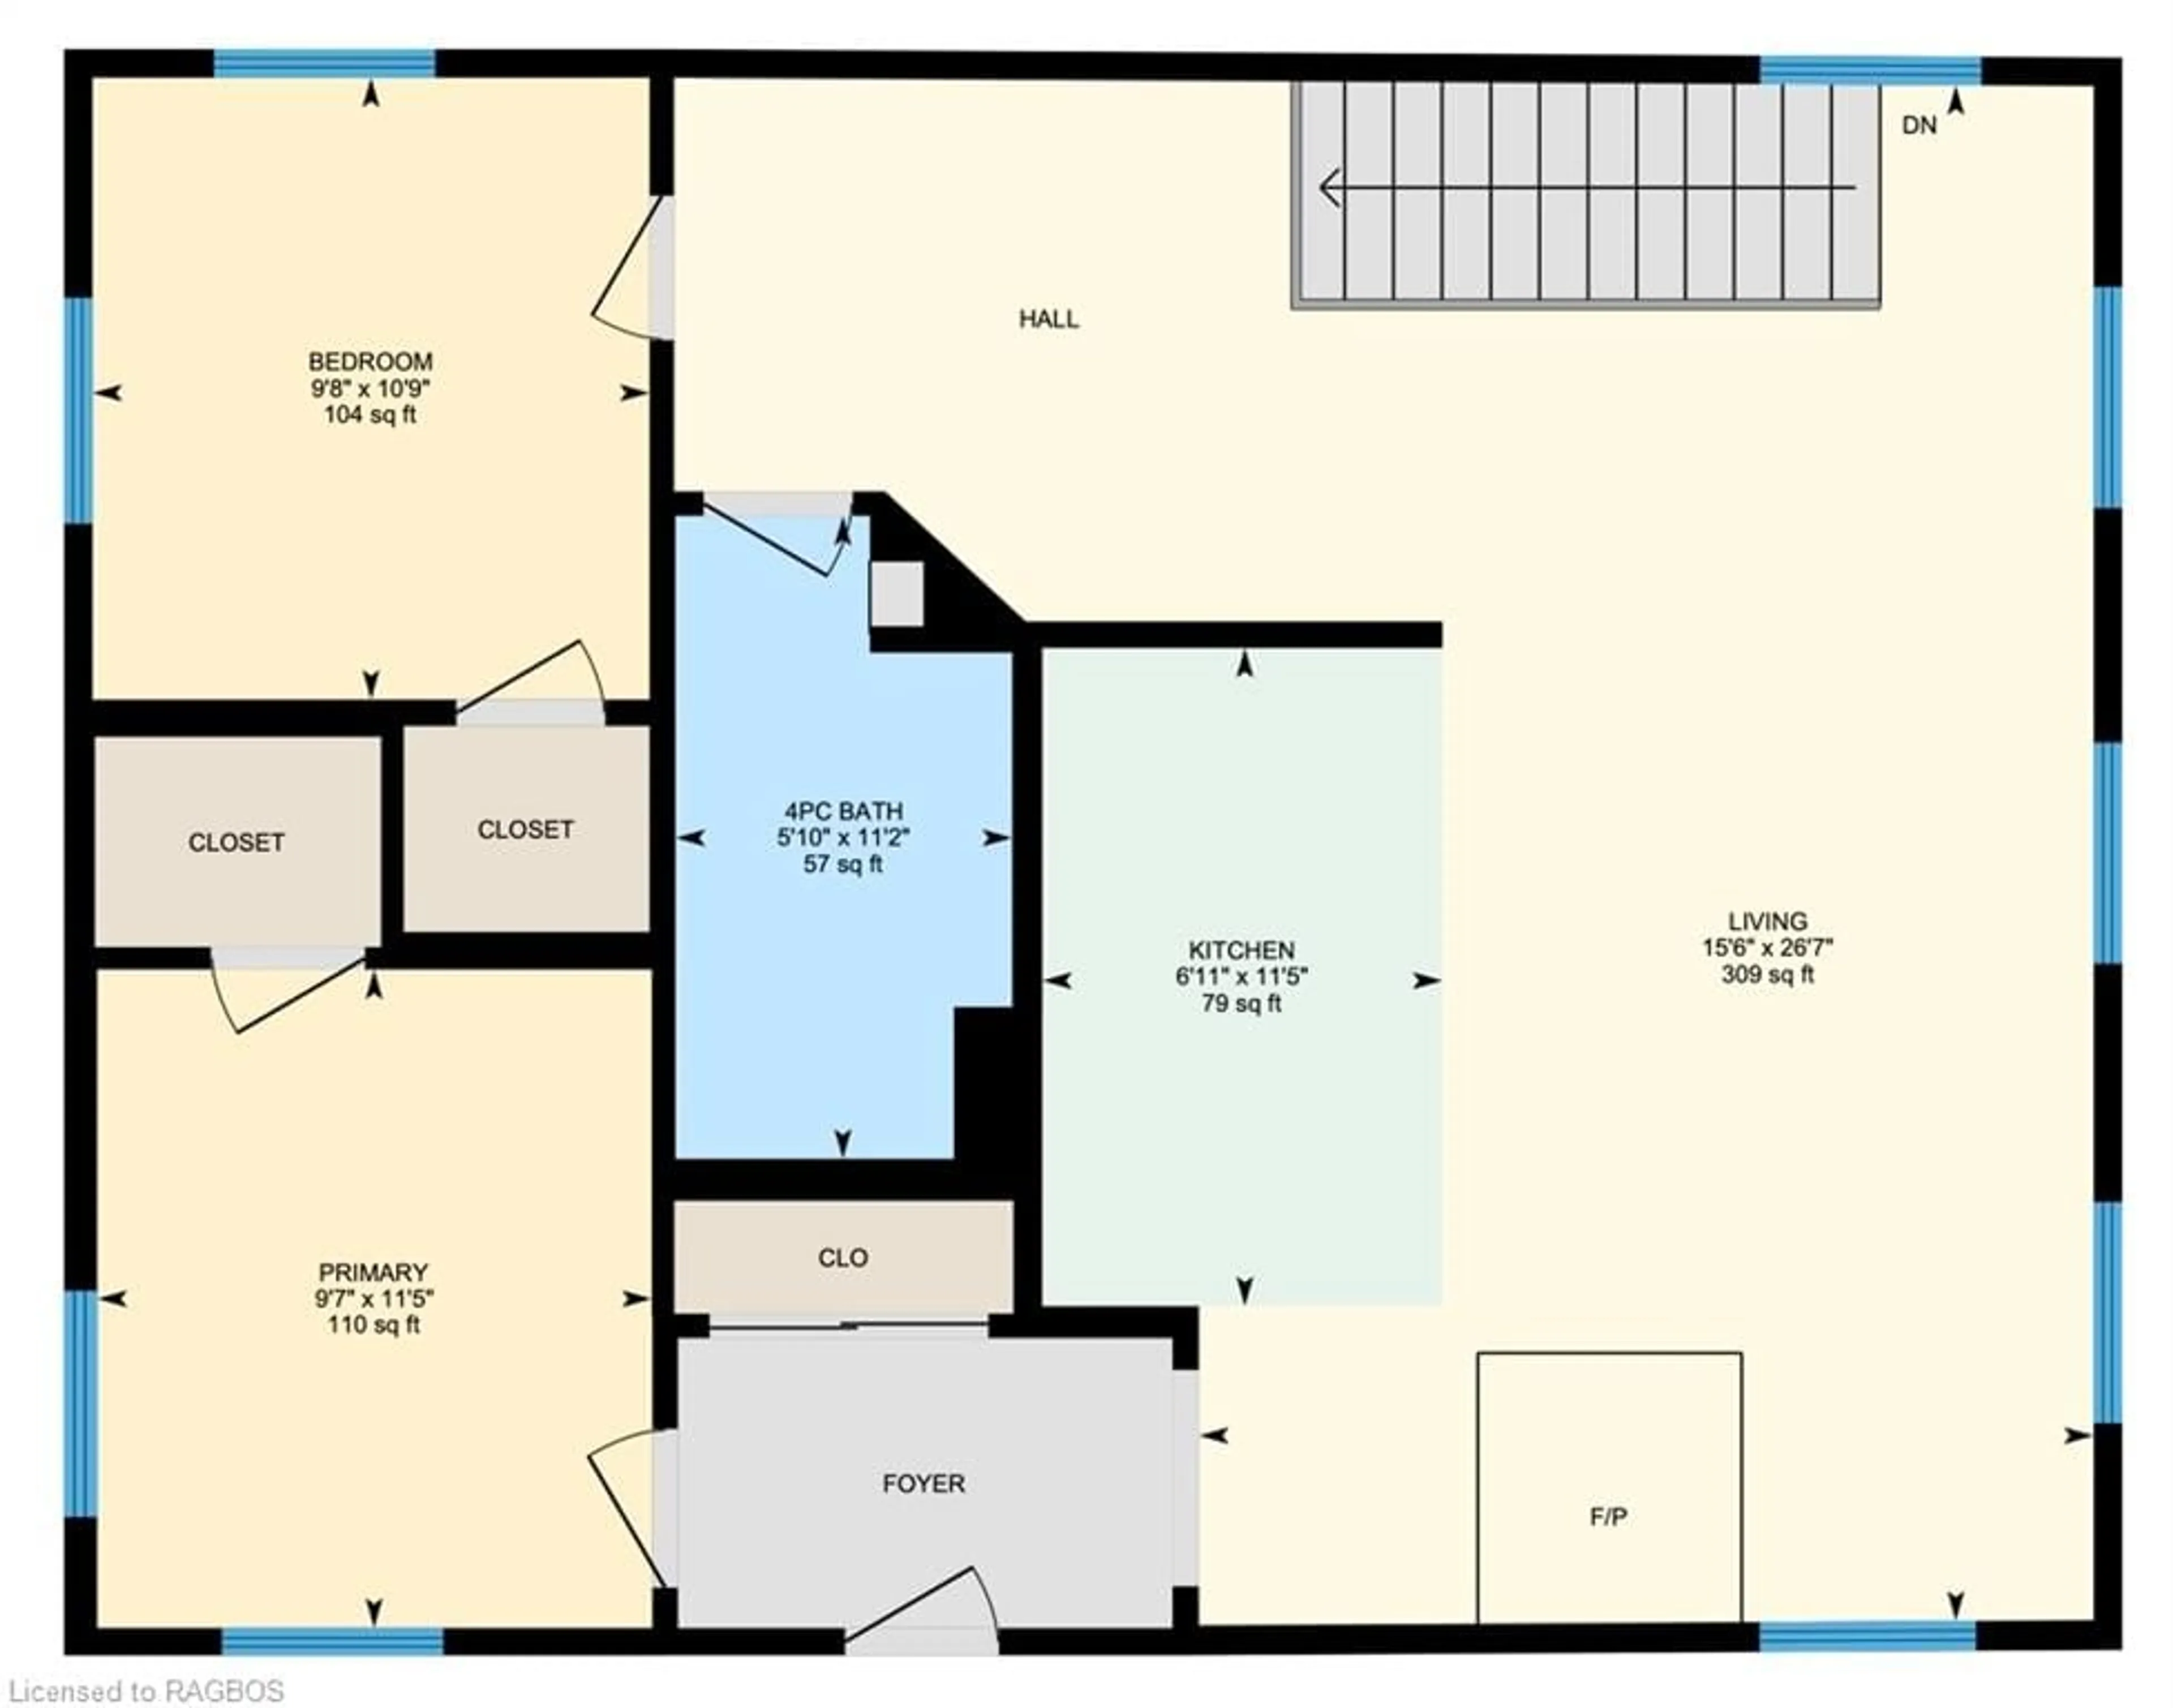 Floor plan for 50 Paradise Dr, Northern Bruce Peninsula Ontario N0H 1W0